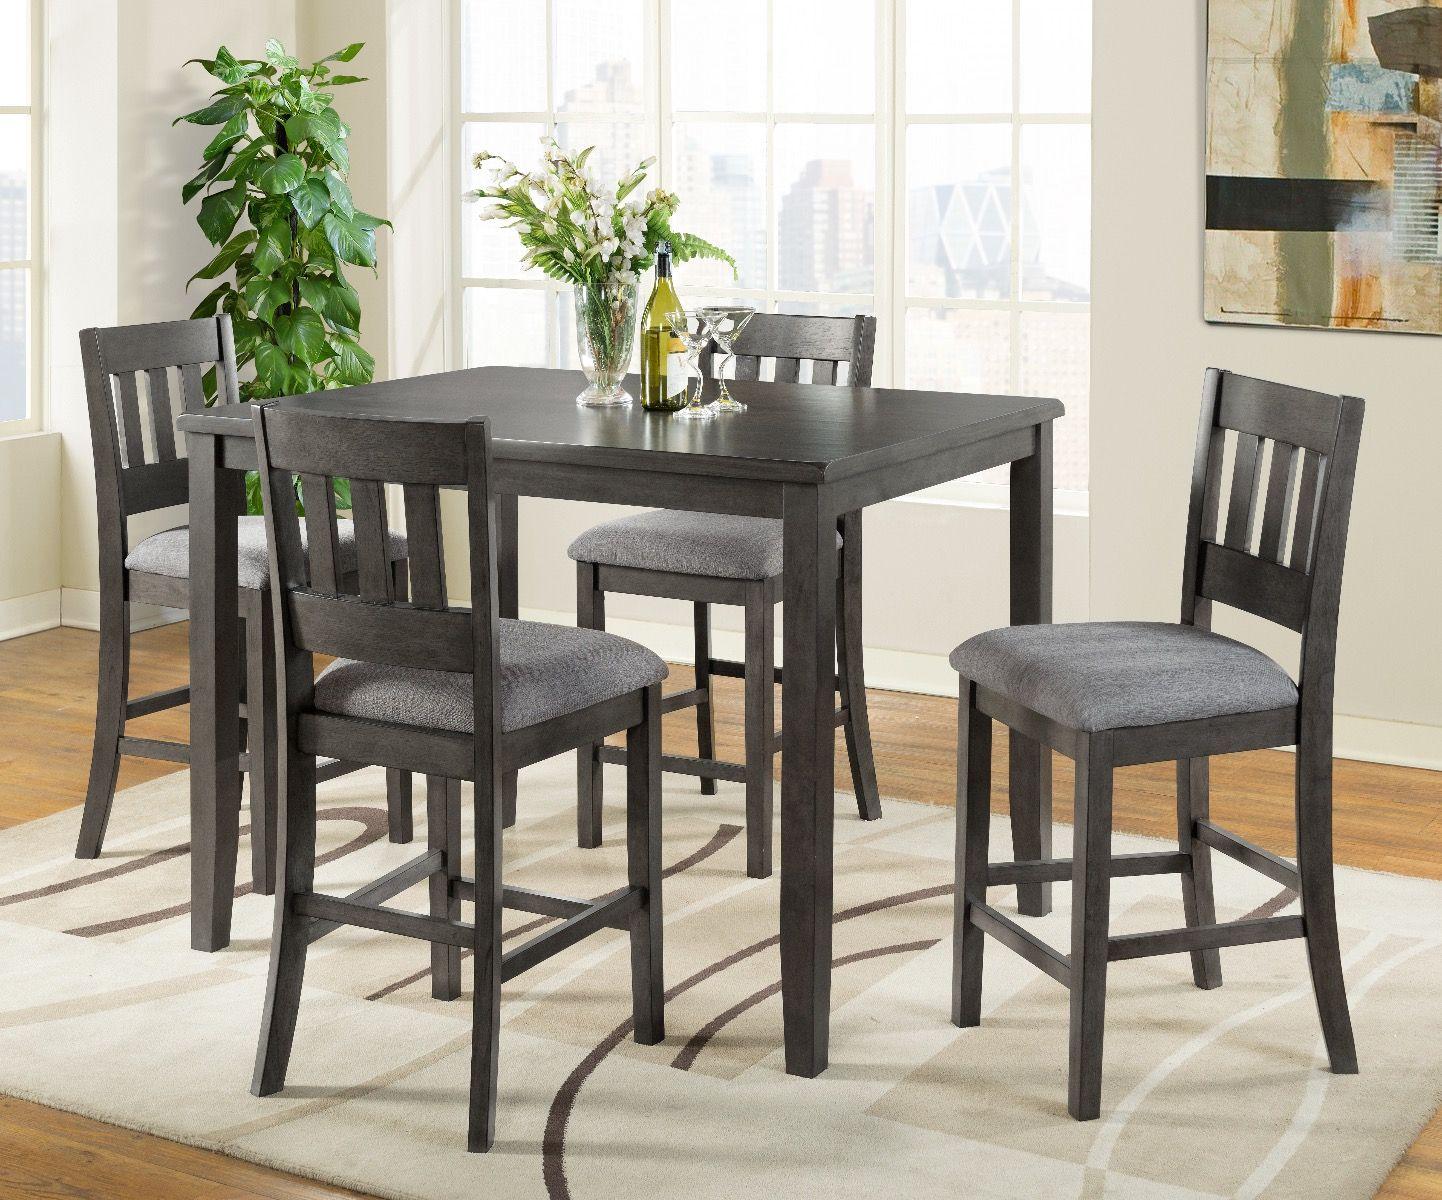 Gray 5pc Counter Height Dining Set with Table and 4 chairs